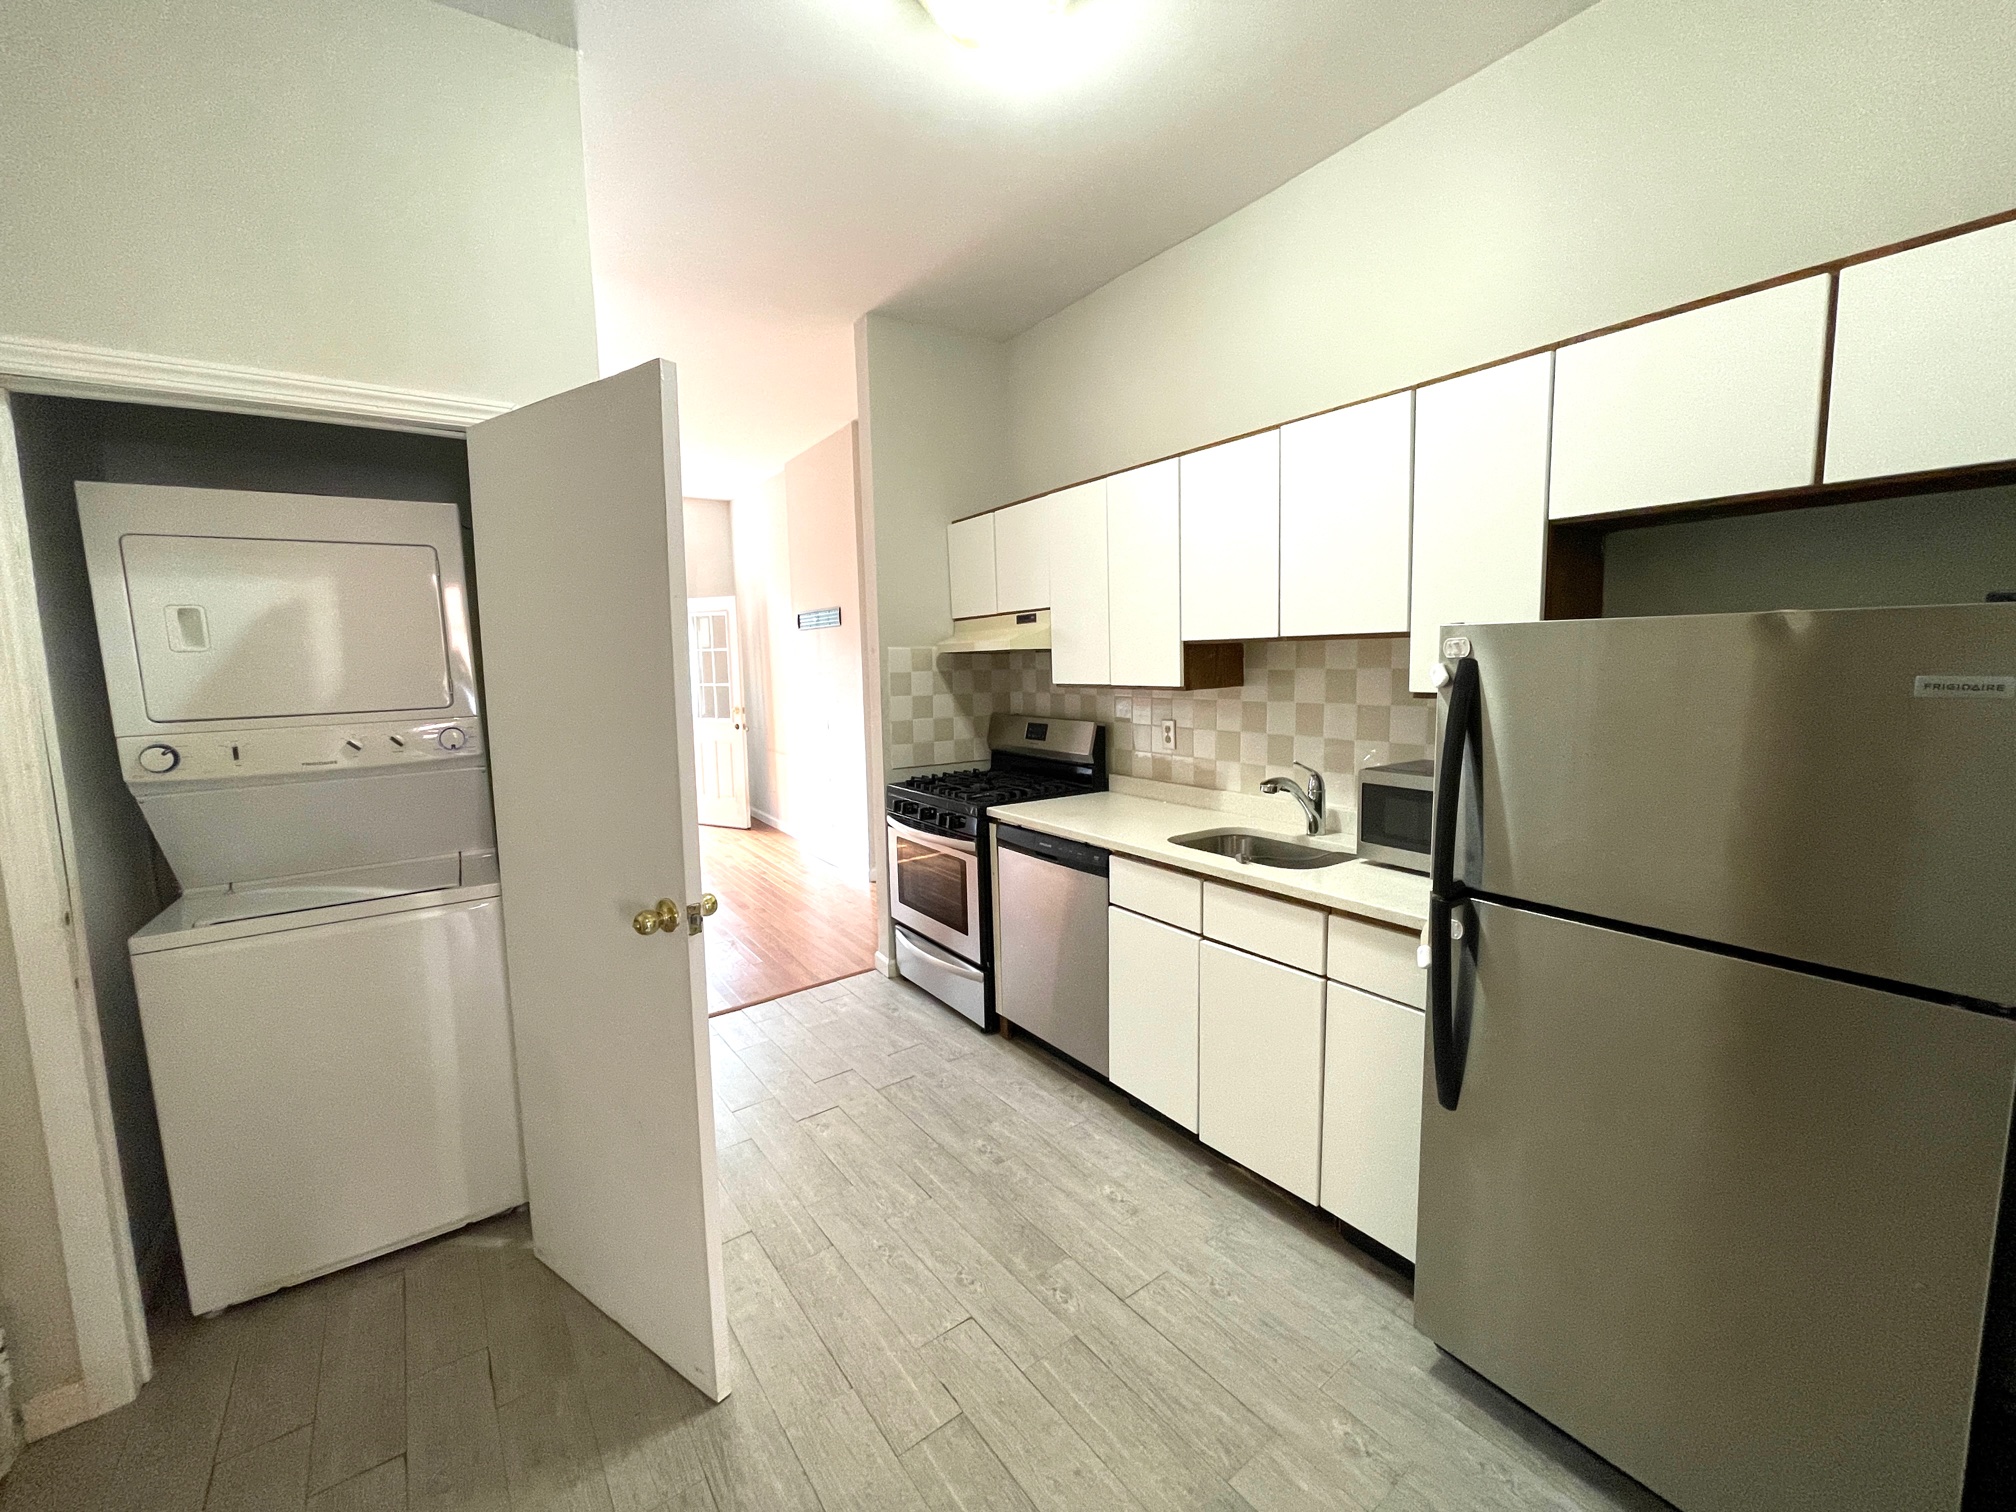 Amazing one bedroom with private outdoor space and washer/ dryer in the unit. Apartment was fully renovated with stainless steel appliances, washer/ dryer in unit and newly renovated bathroom. This home has a great open layout and a fantastic location making this a perfect home!
